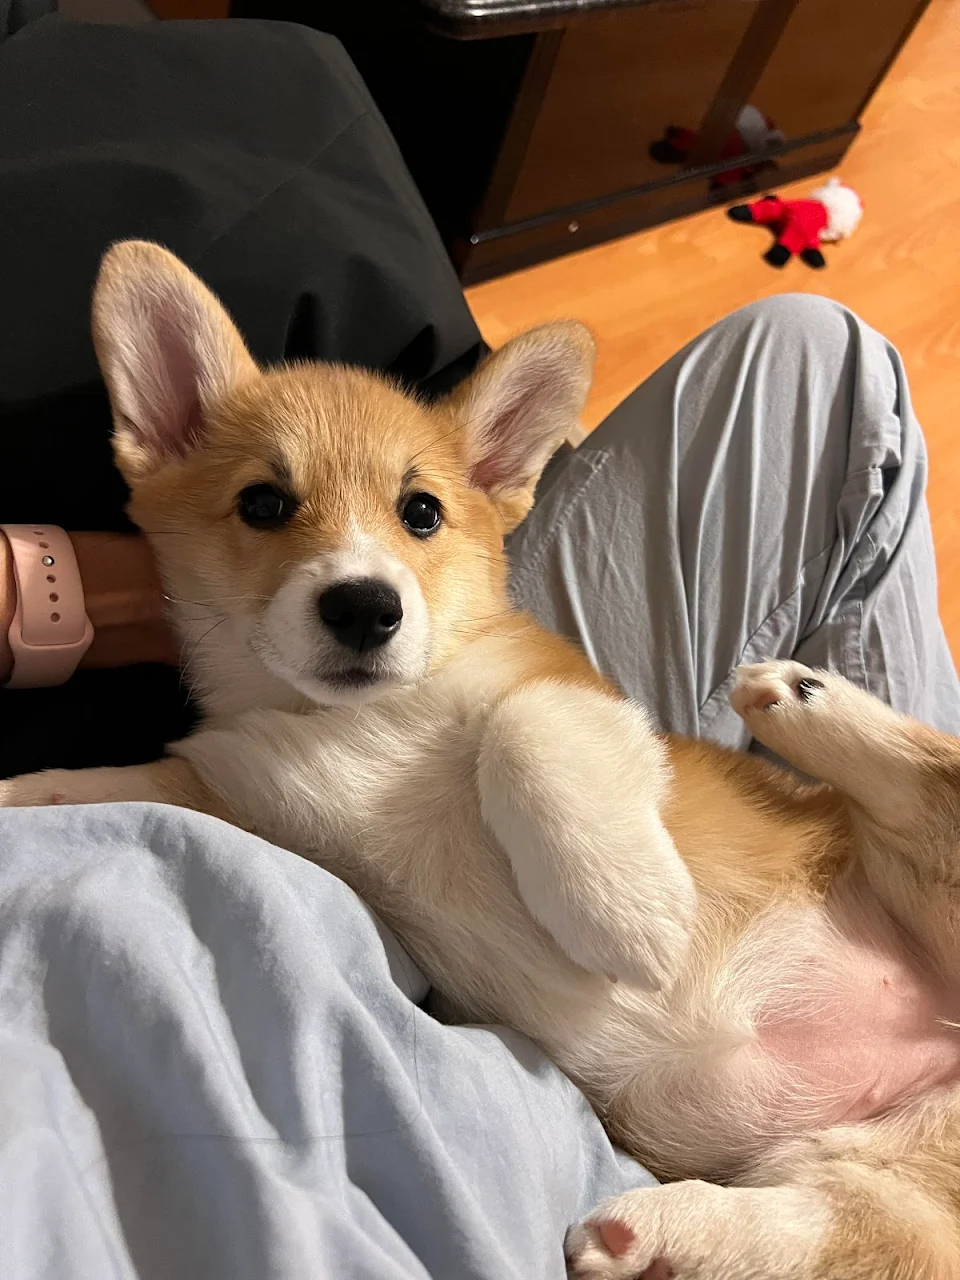 Draw me like one of your French girls